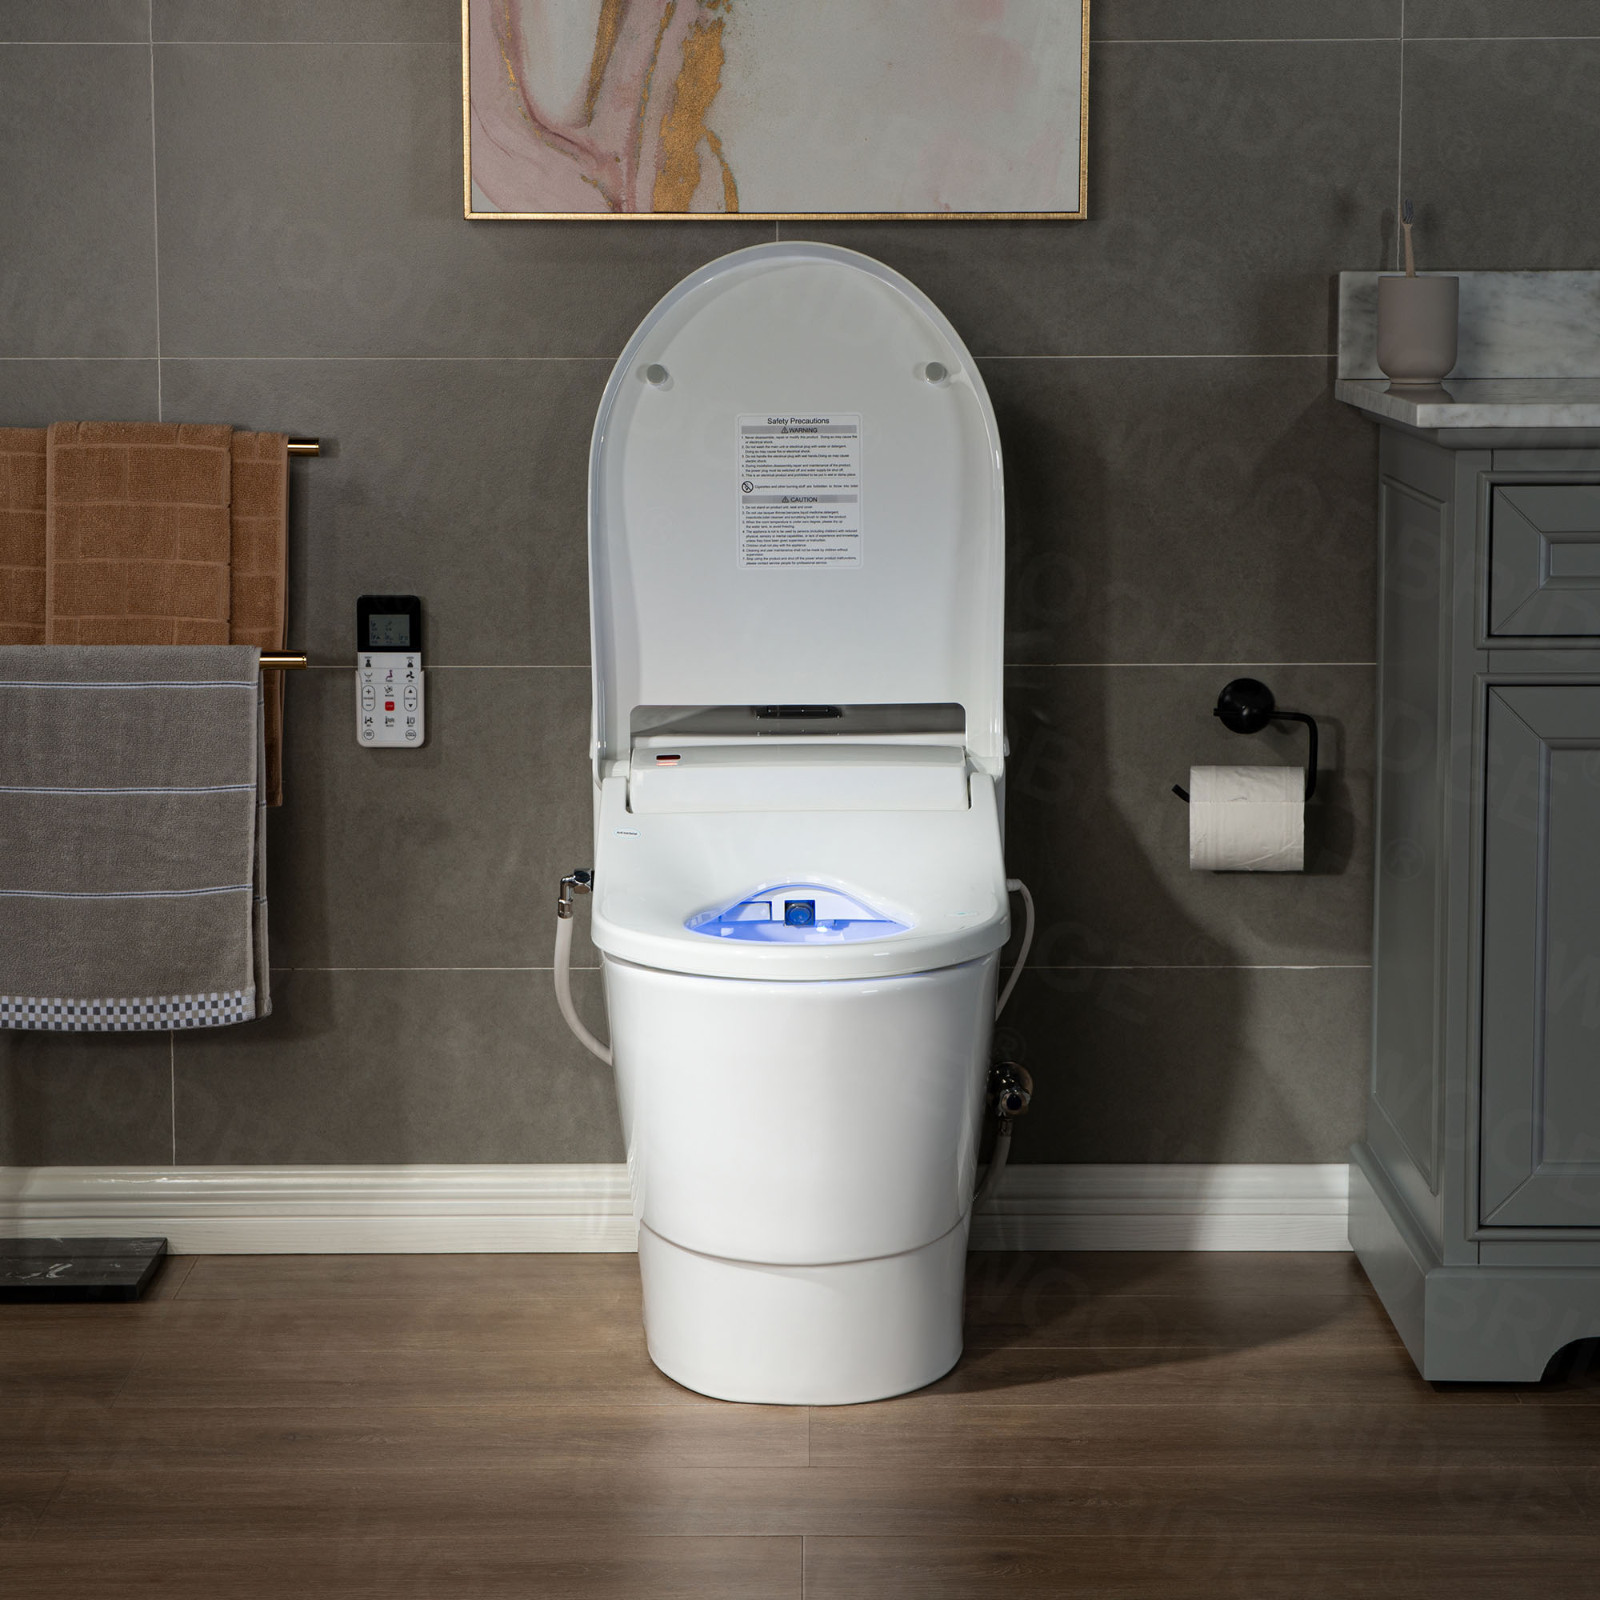  WOODBRIDGE Toilet & Bidet Luxury Elongated One Piece Advanced Smart Seat with Temperature Controlled Wash Functions and Air Dryer, Toilet with Bidet. T-0737, Bidet & Toilet_9720